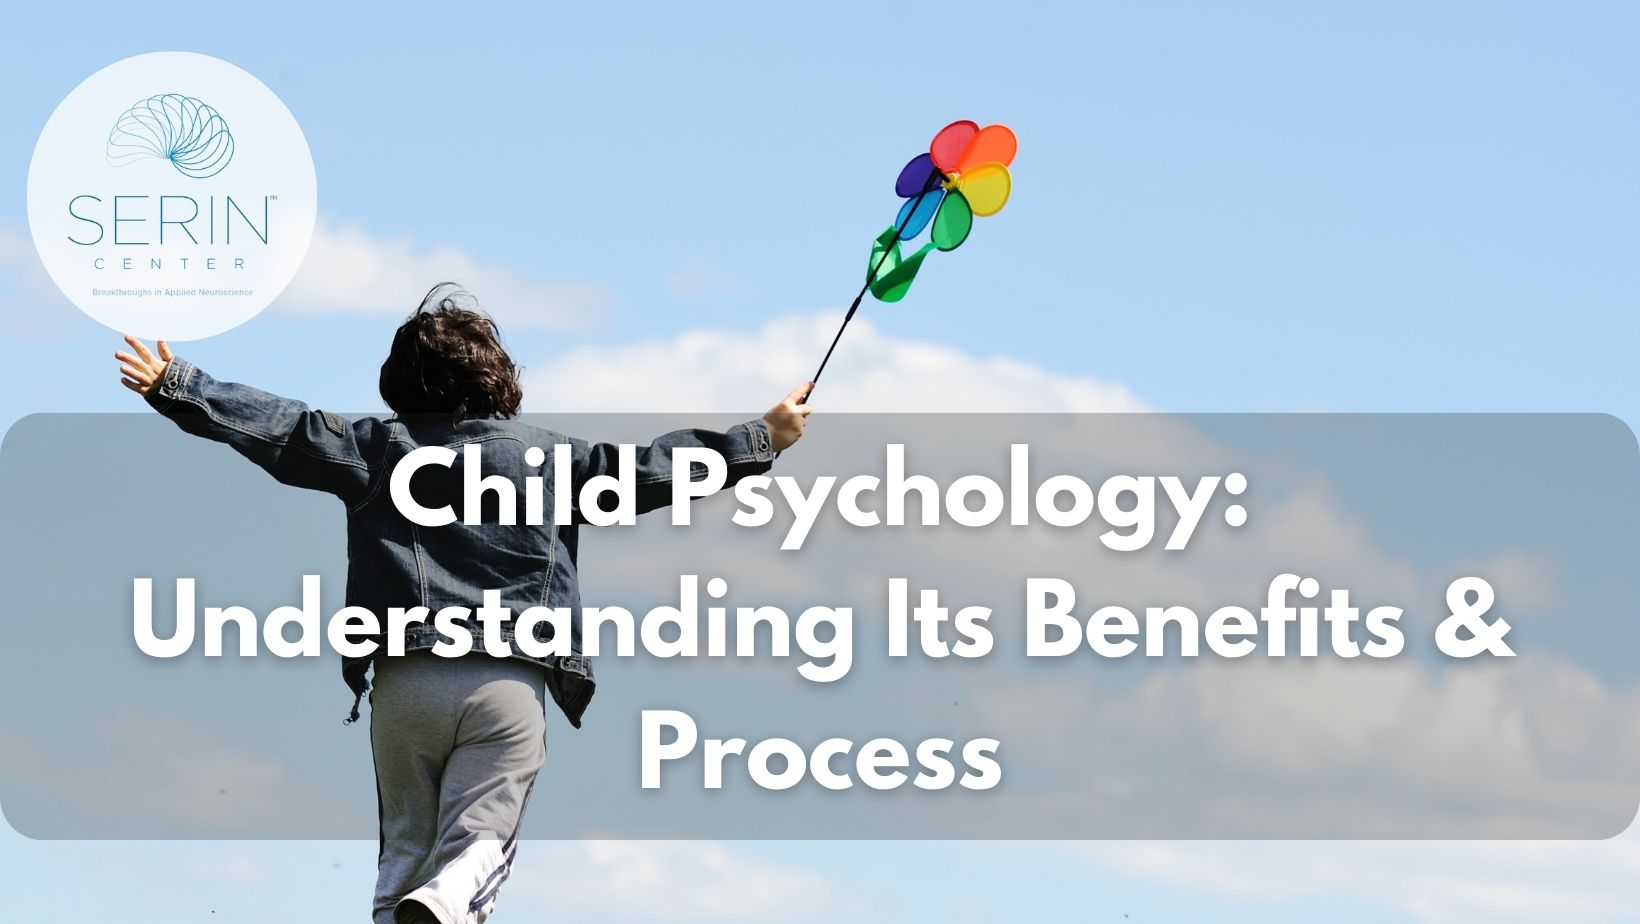 Child psychology is the study of the mental, emotional, and behavioral development of children. By understanding child psychology, experts can gain insights into the benefits children may experience and the underlying processes that contribute to their